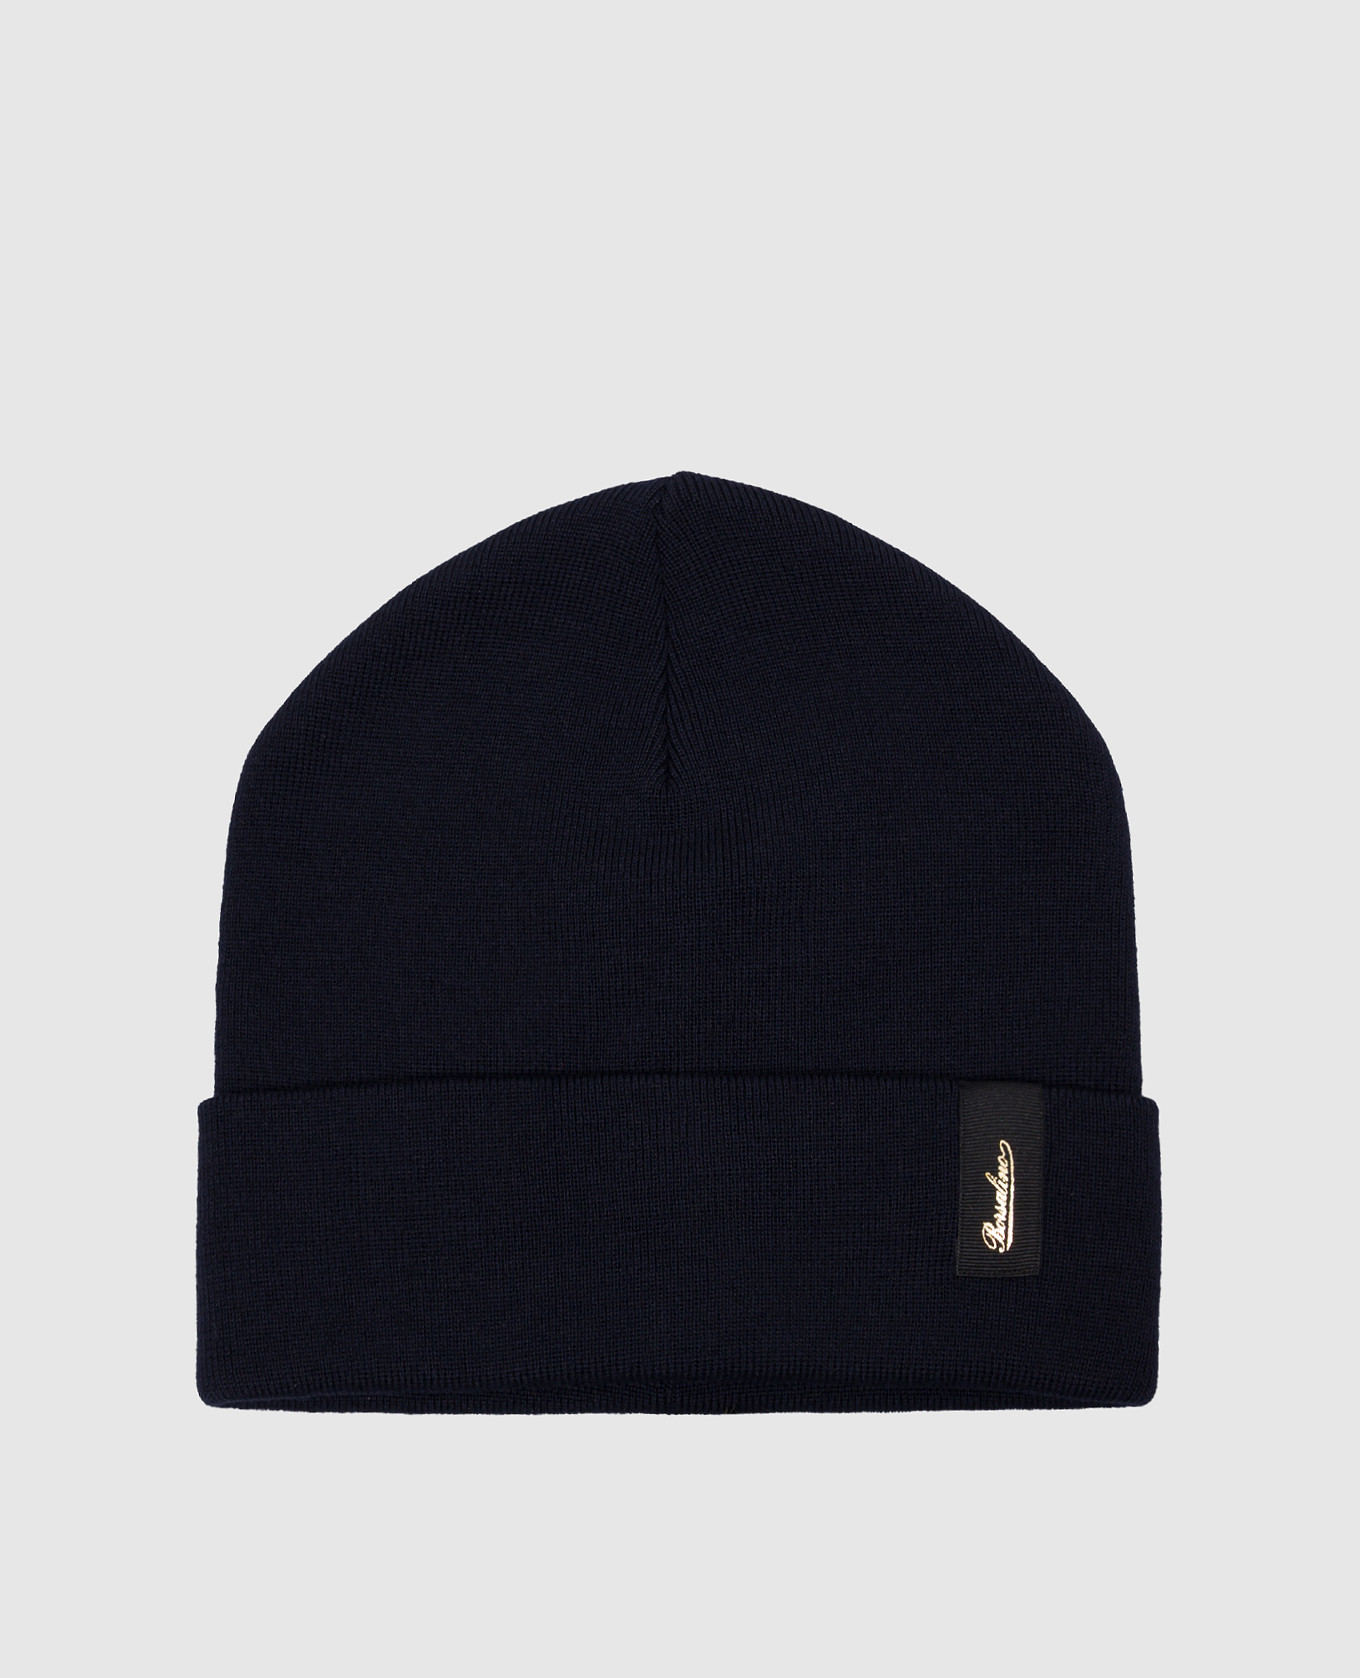 Hill blue wool cap with logo